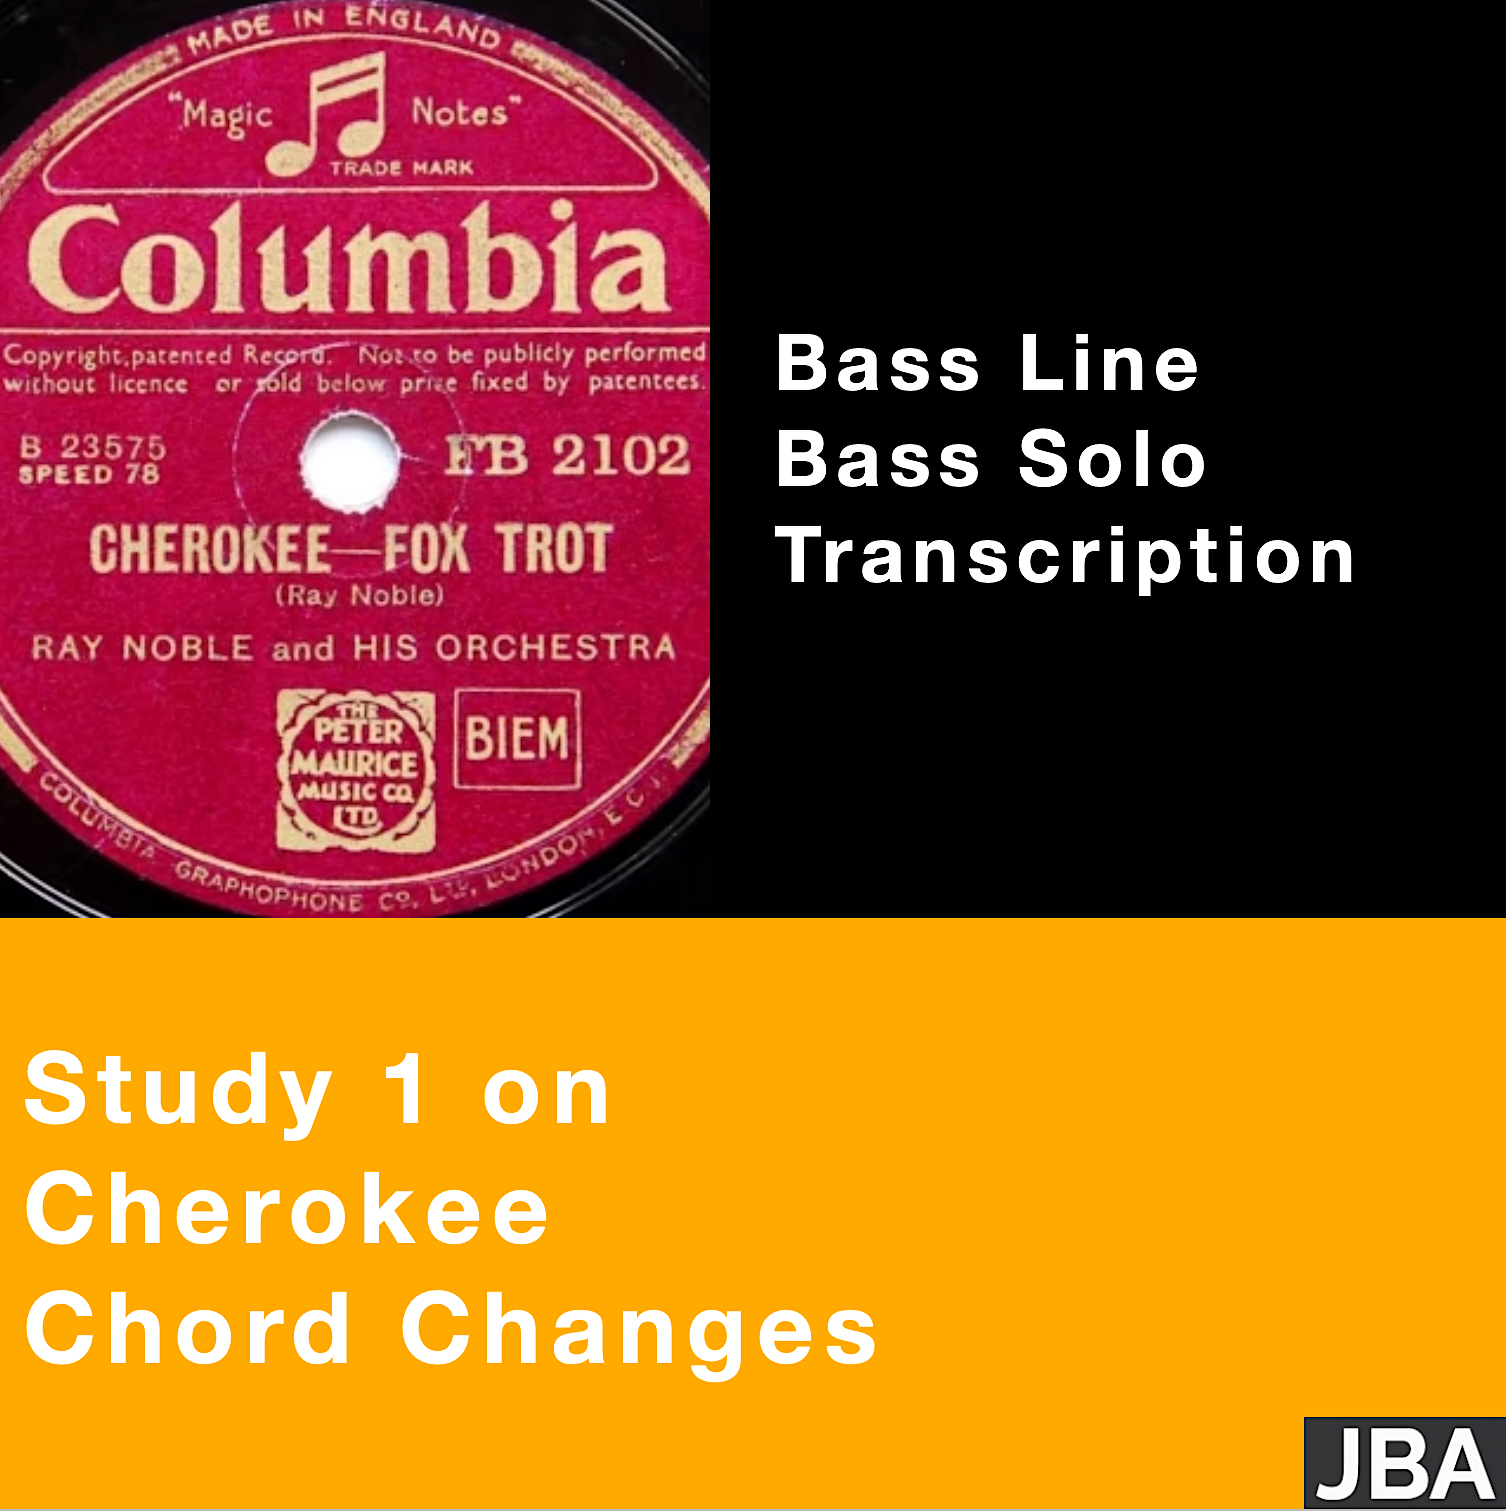 Study 1 on Cherokee chord changes